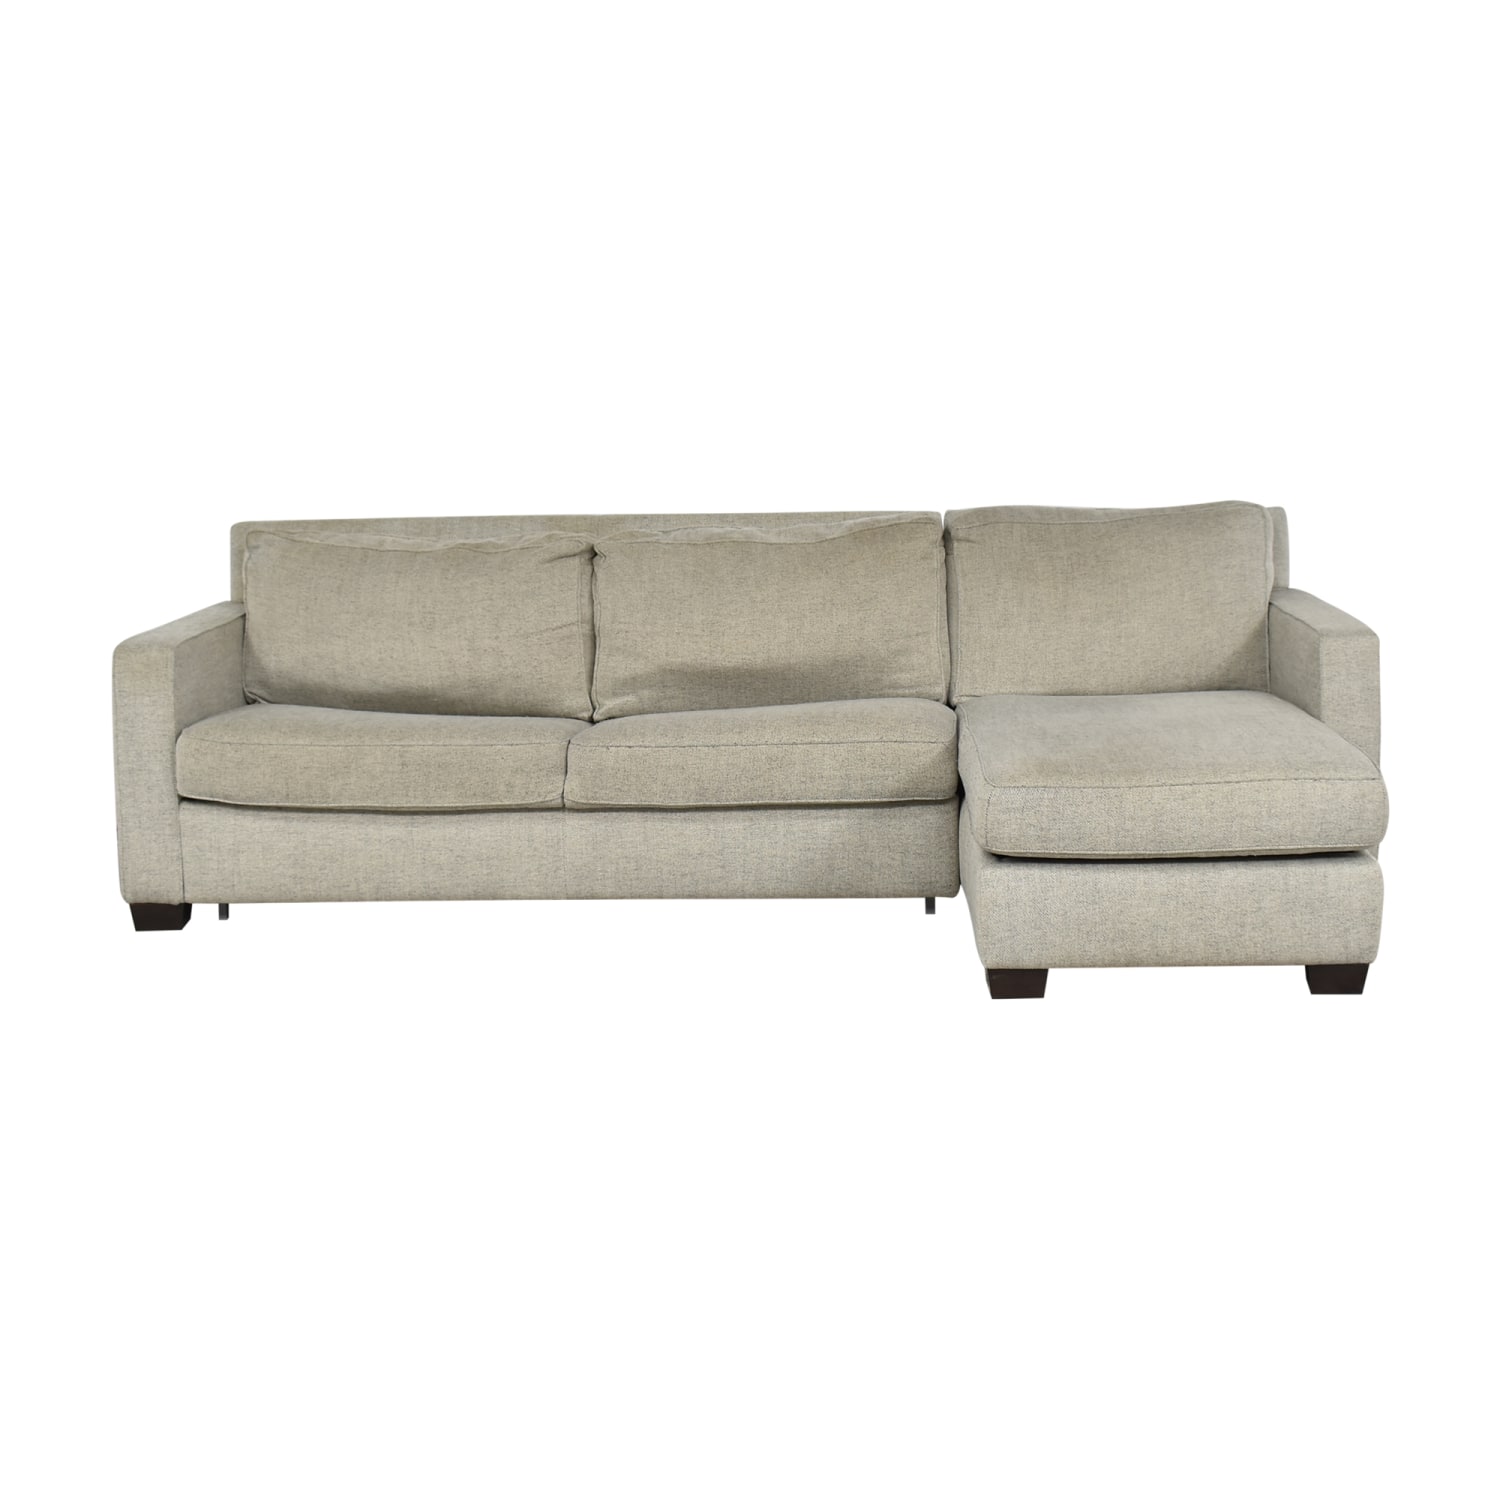 shop West Elm Henry Two Piece Sleeper Sectional with Storage Chaise West Elm Sofa Beds